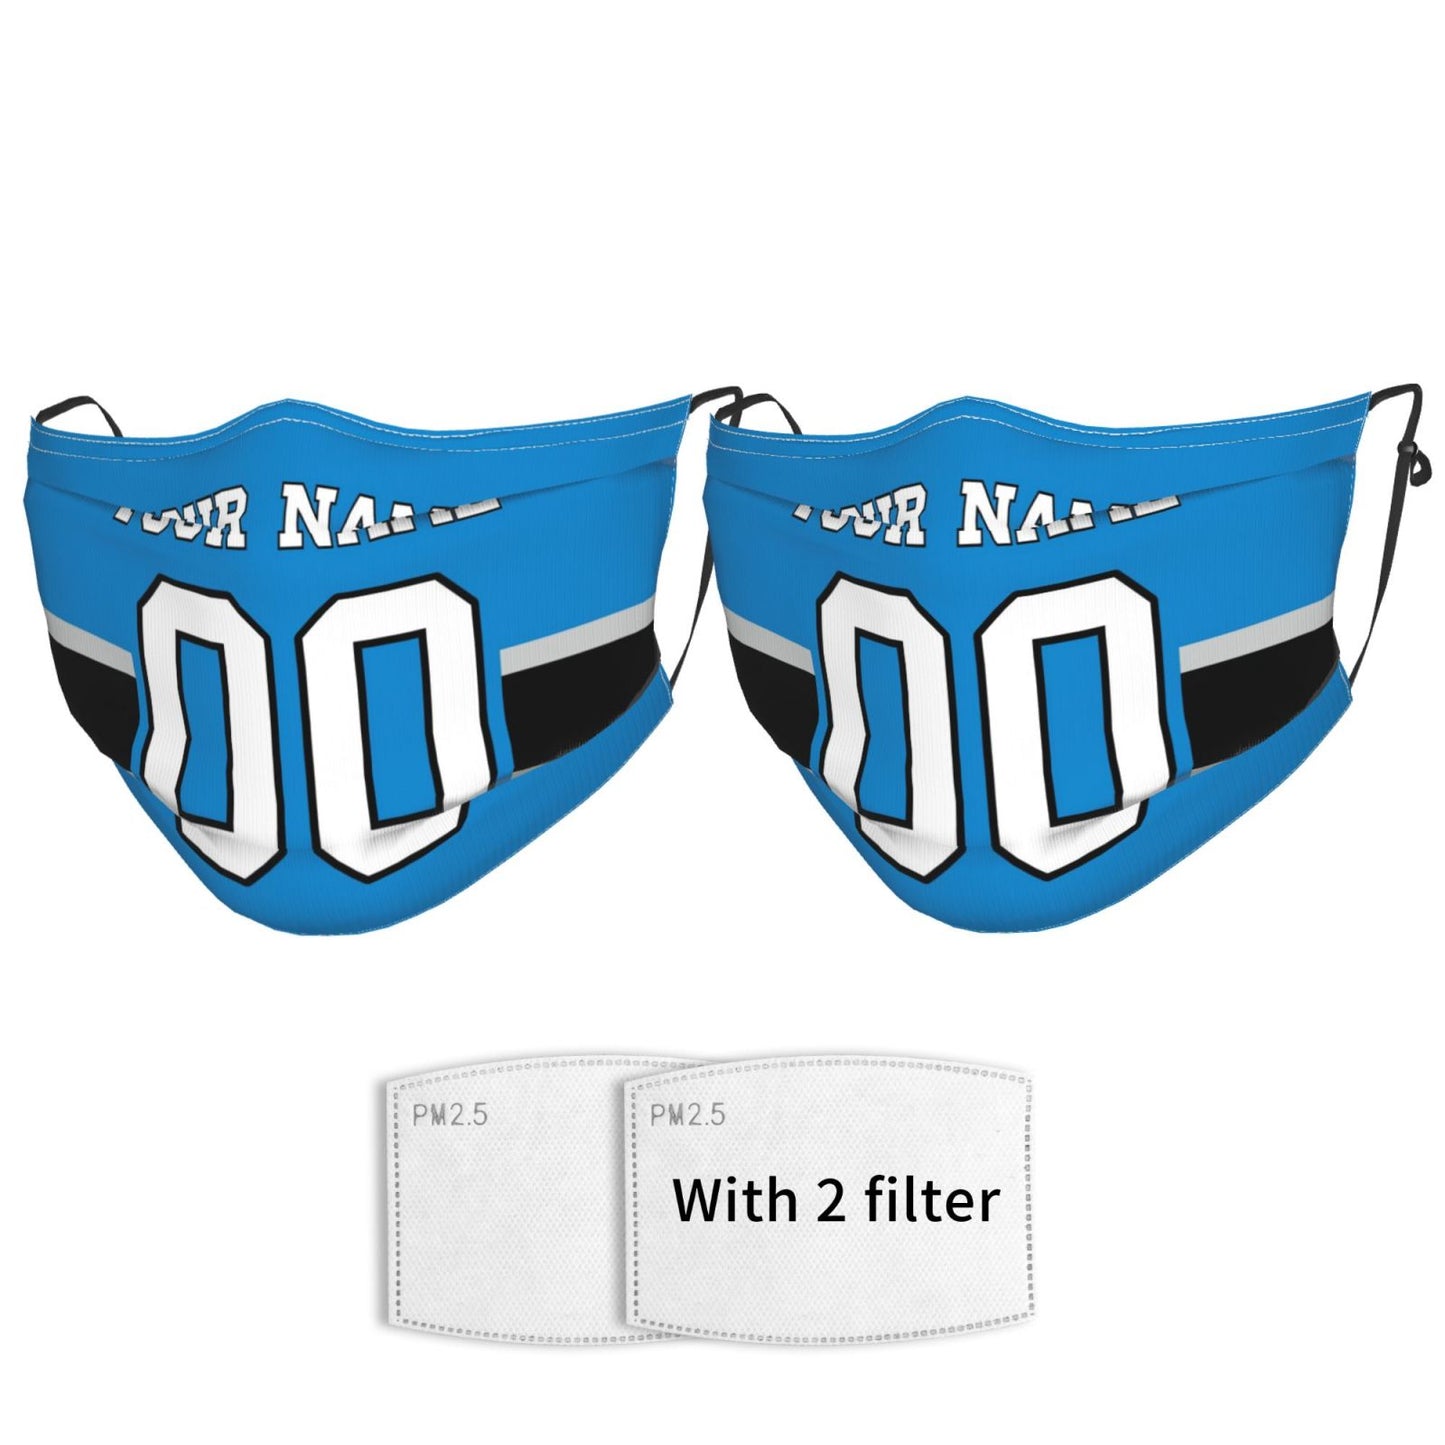 2-Pack Carolina Panthers Face Covering Football Team Decorative Adult Face Mask With Filters PM 2.5 Blue